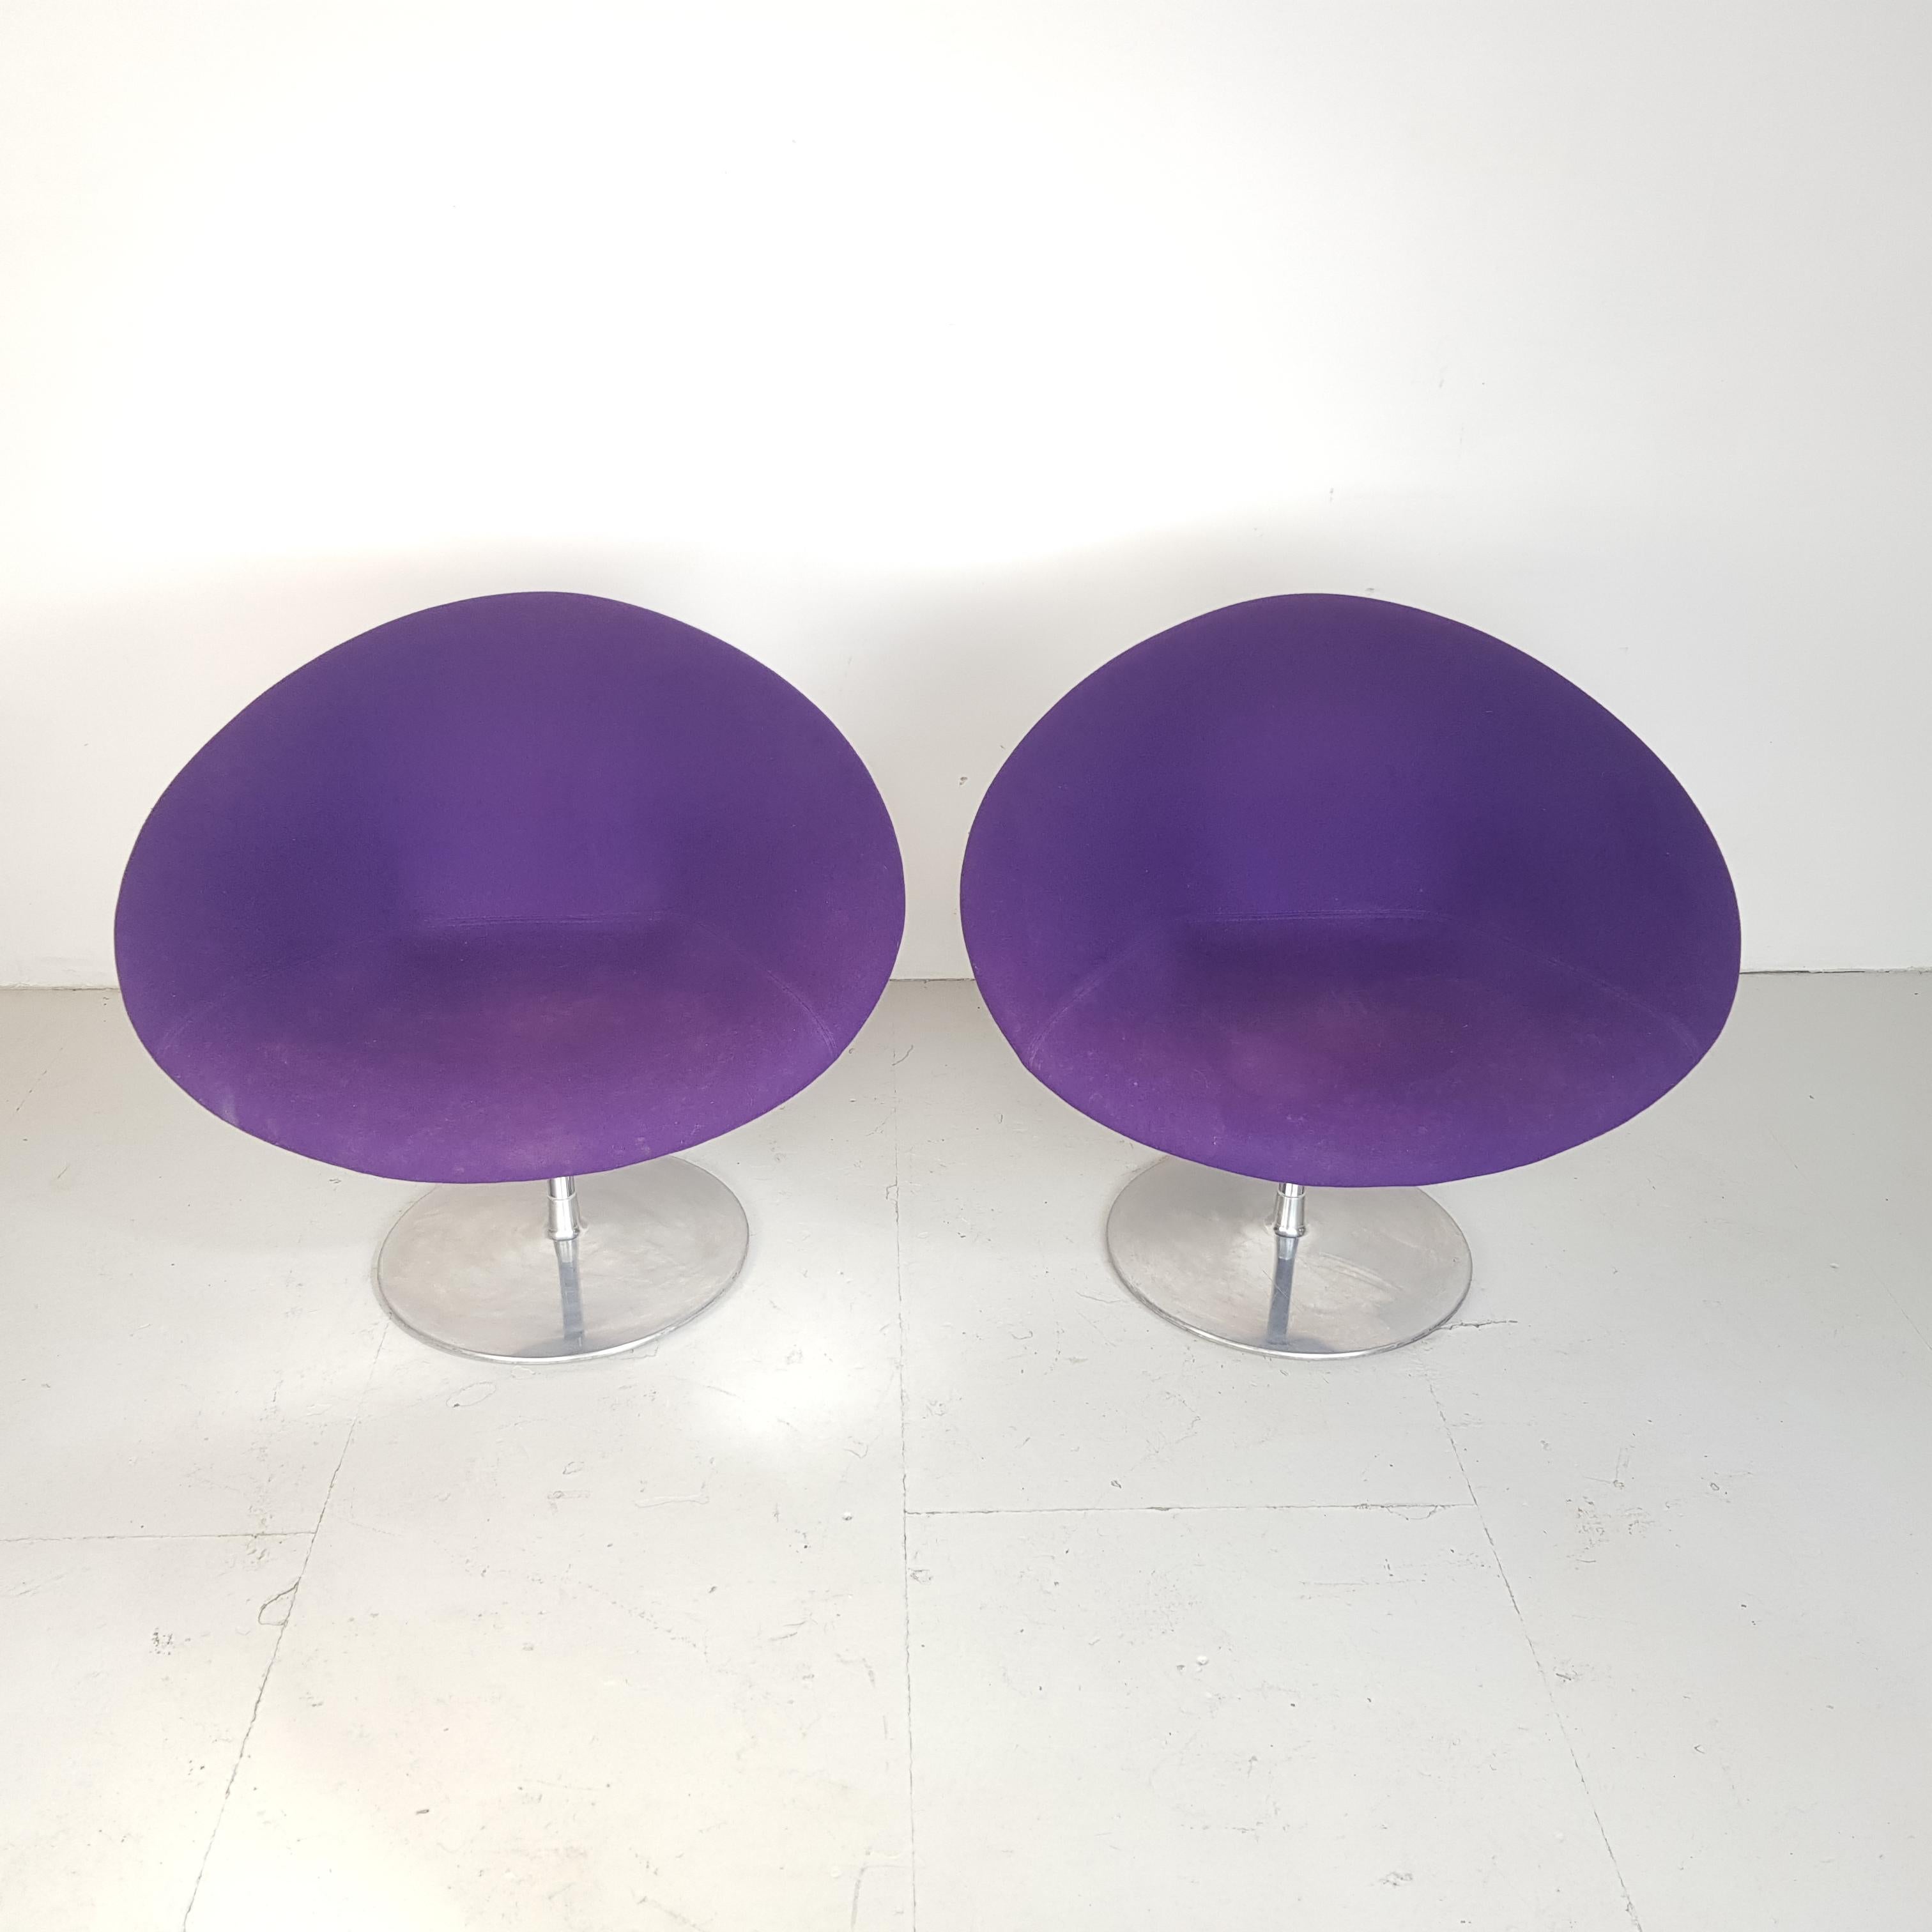 Fabulous pair of vintage 1960s-1970s Little Globe chairs designed by Pierre Paulin for Artifort. Base discs in polished aluminium with chrome tube, original upholstered seats in very on-trend purple their shell shape makes them particularly